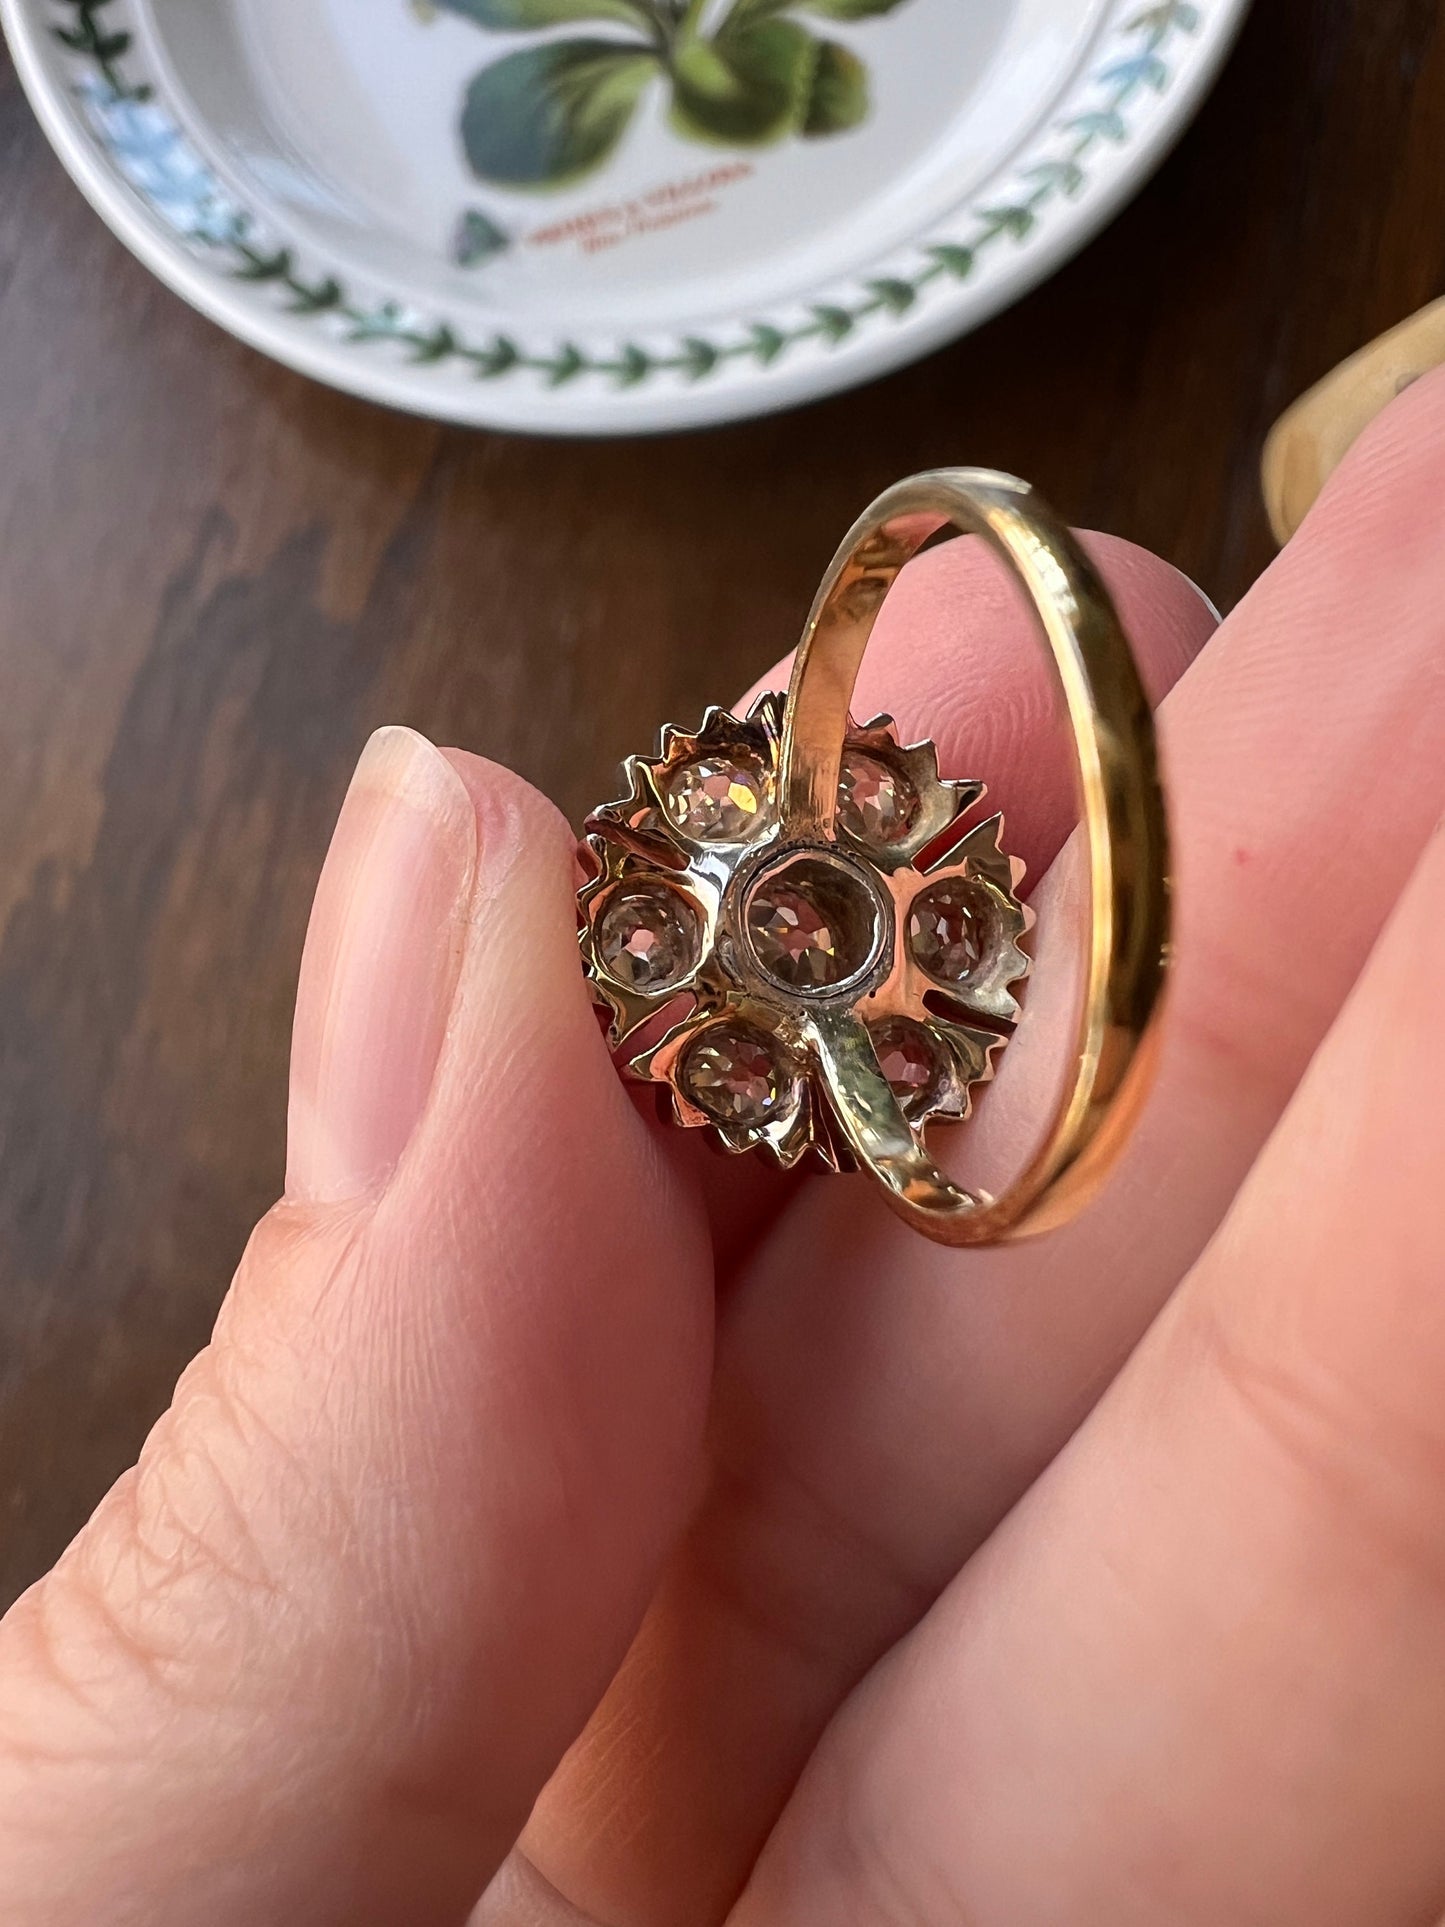 FLORAL Victorian ANTIQUE 1.7 Carat Old Mine Cut DIAMOND Daisy Cluster Ring 18k Gold Romantic Gift OmC Figural Flower Chunky 1.7Ctw Tdw OmC